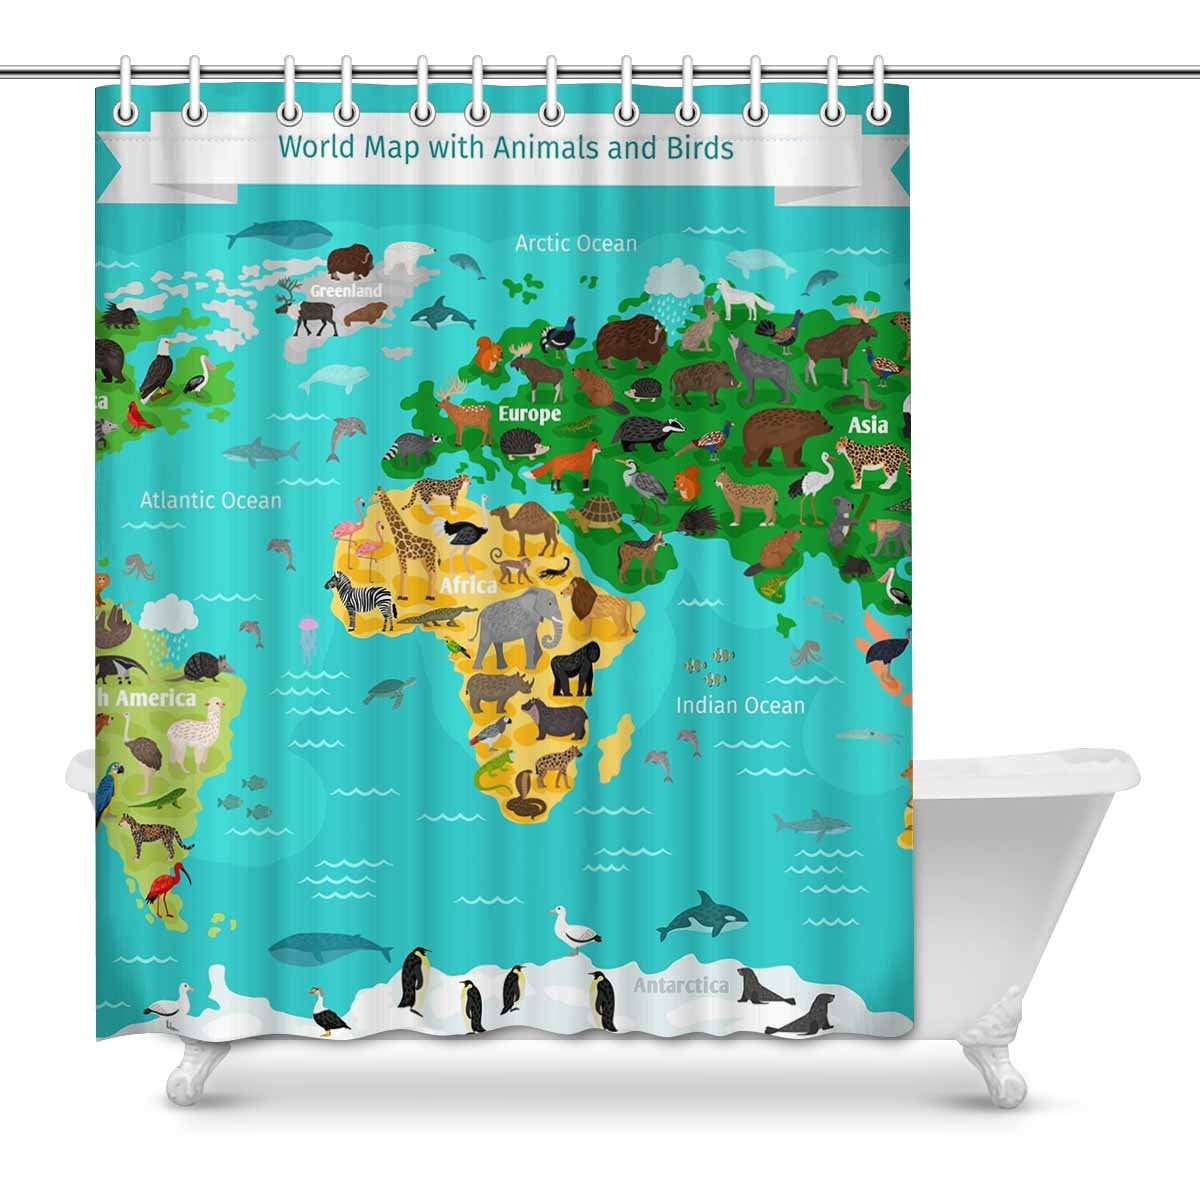 Details about   Animal World Map Bath Shower Curtain Bathroom Waterproof Fabric 71x71inches 